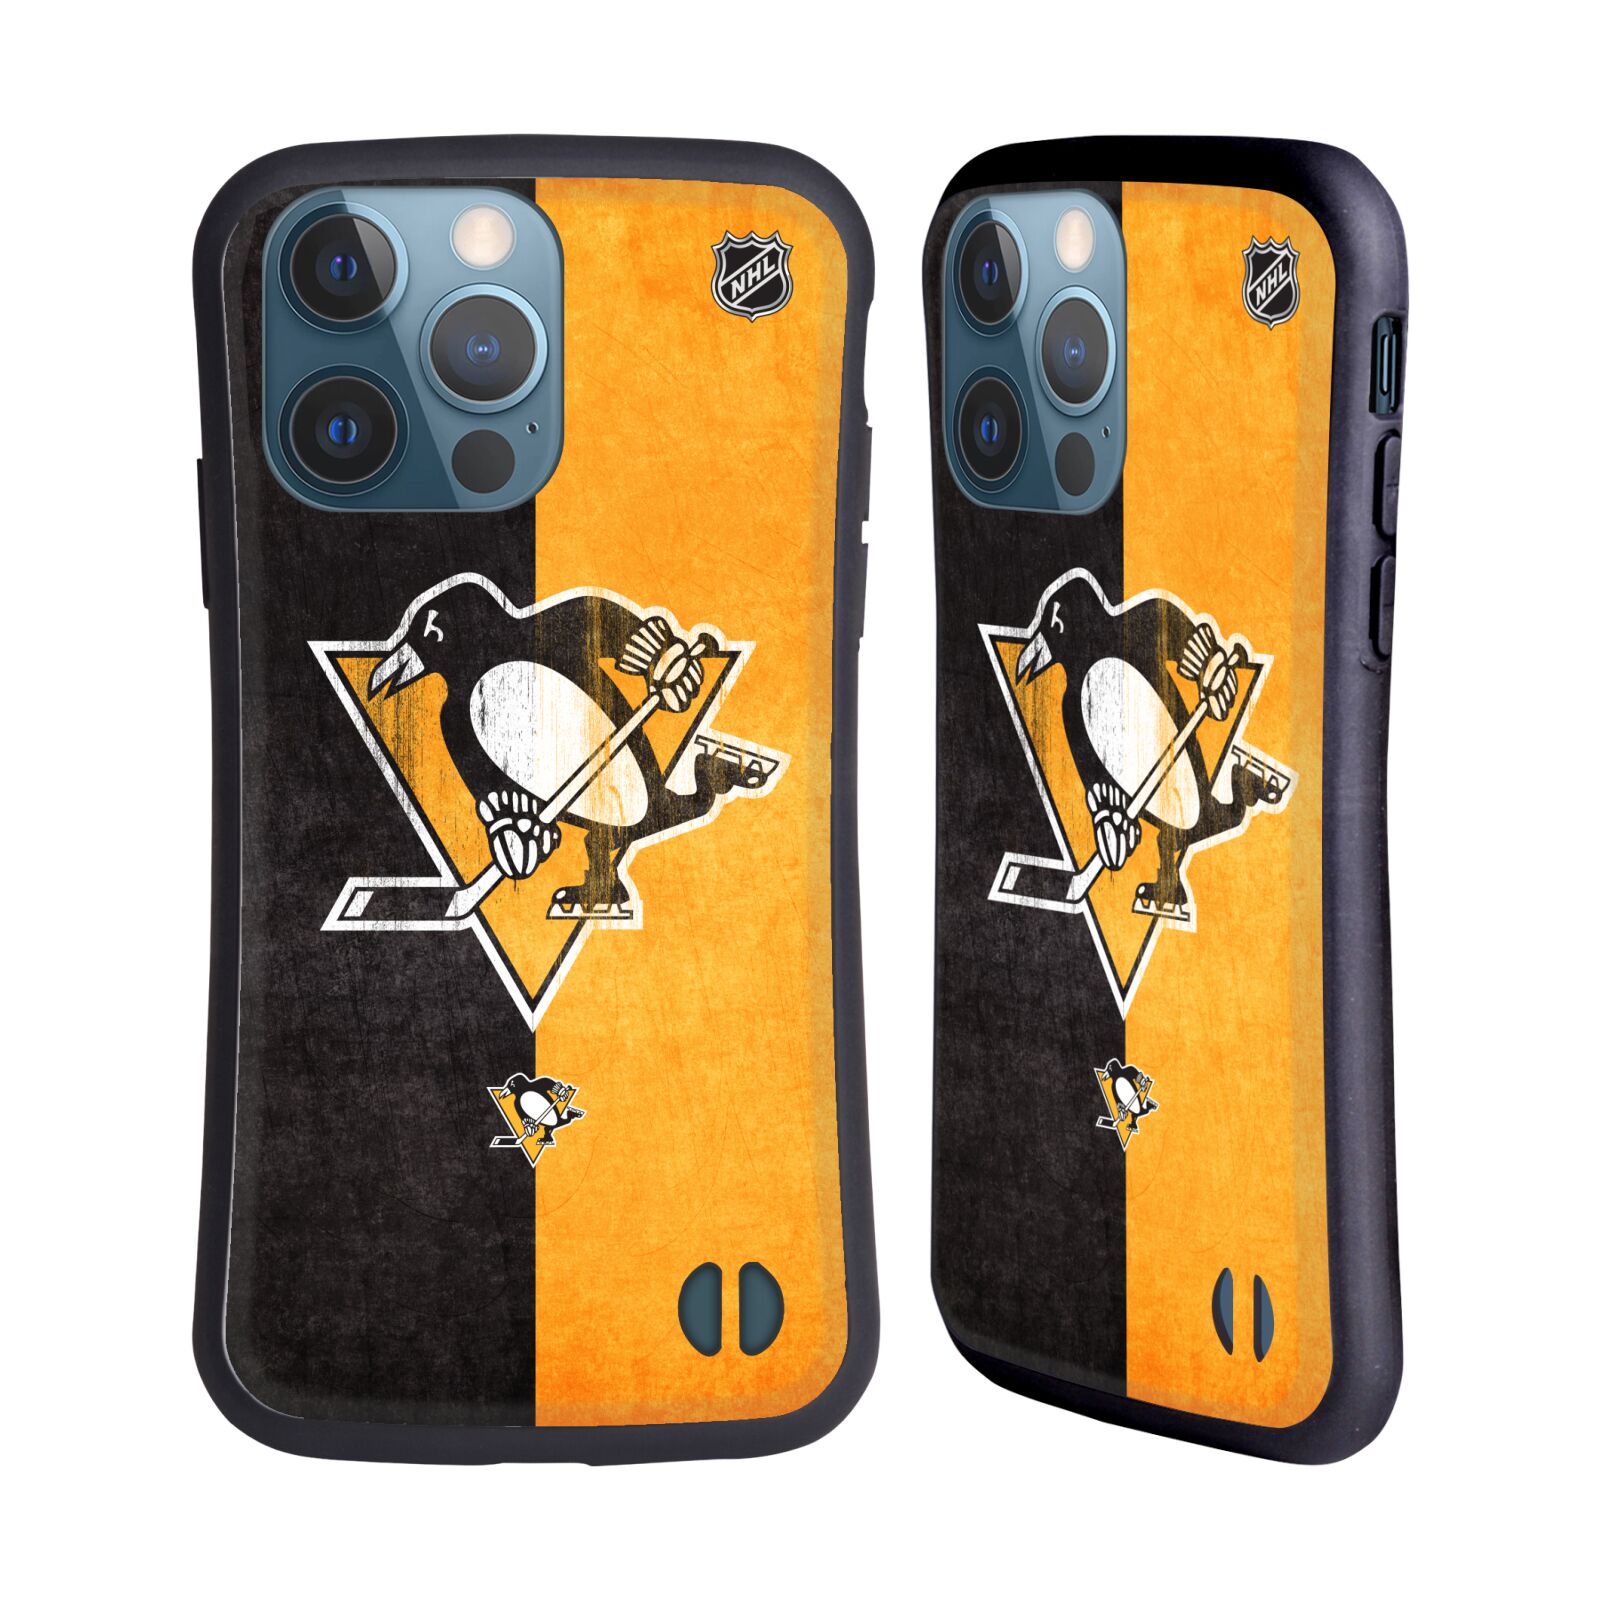 Obal na mobil Apple iPhone 13 PRO - HEAD CASE - NHL - pruhy logo Pittsburgh Penguins